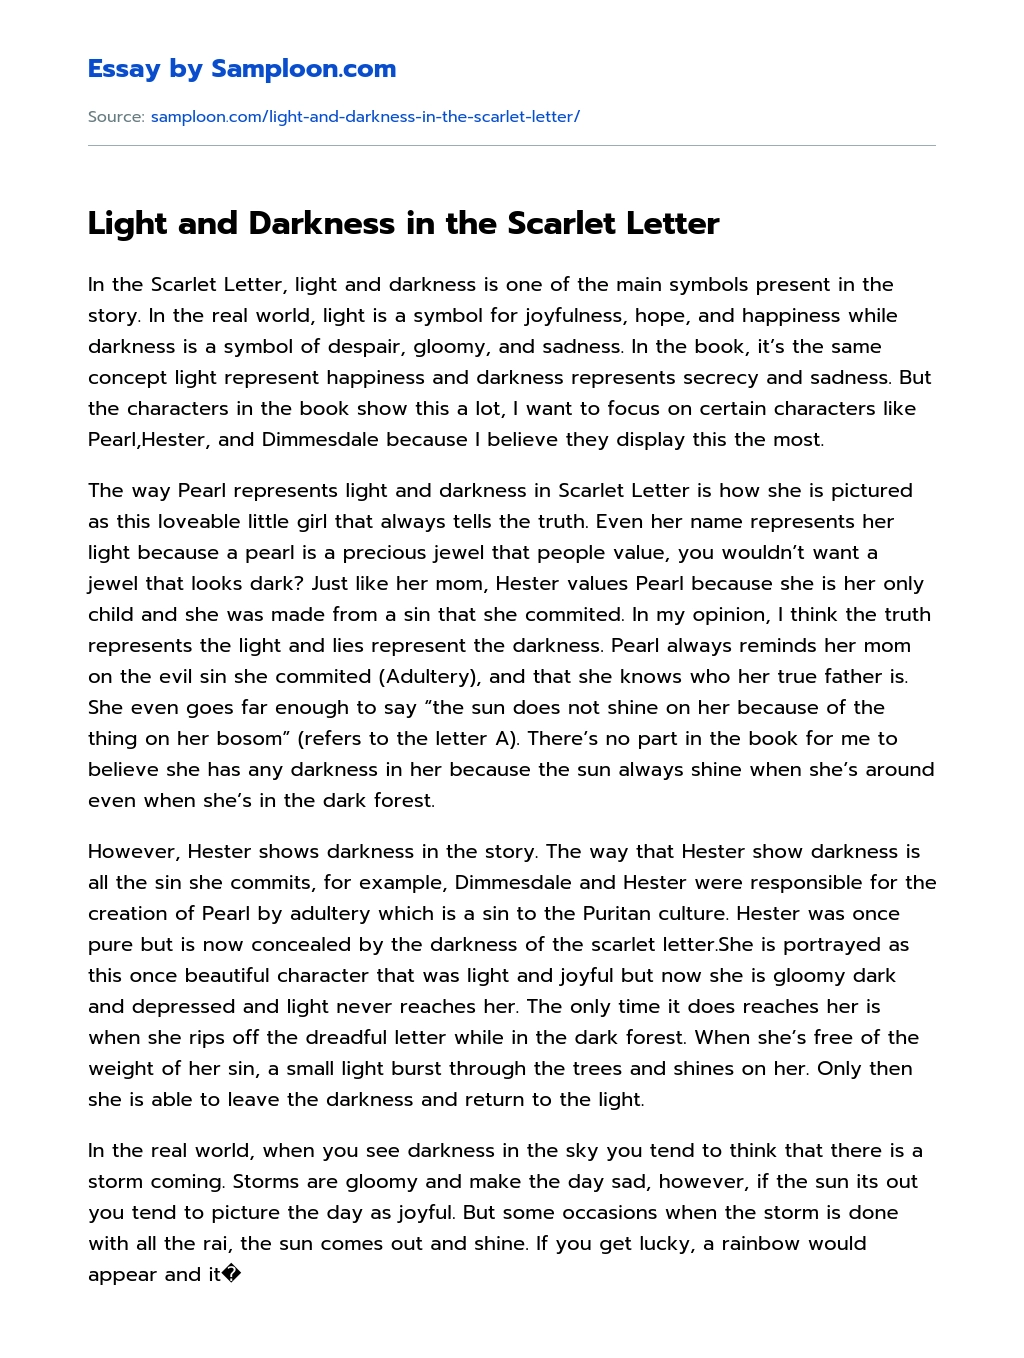 Light and Darkness in the Scarlet Letter essay